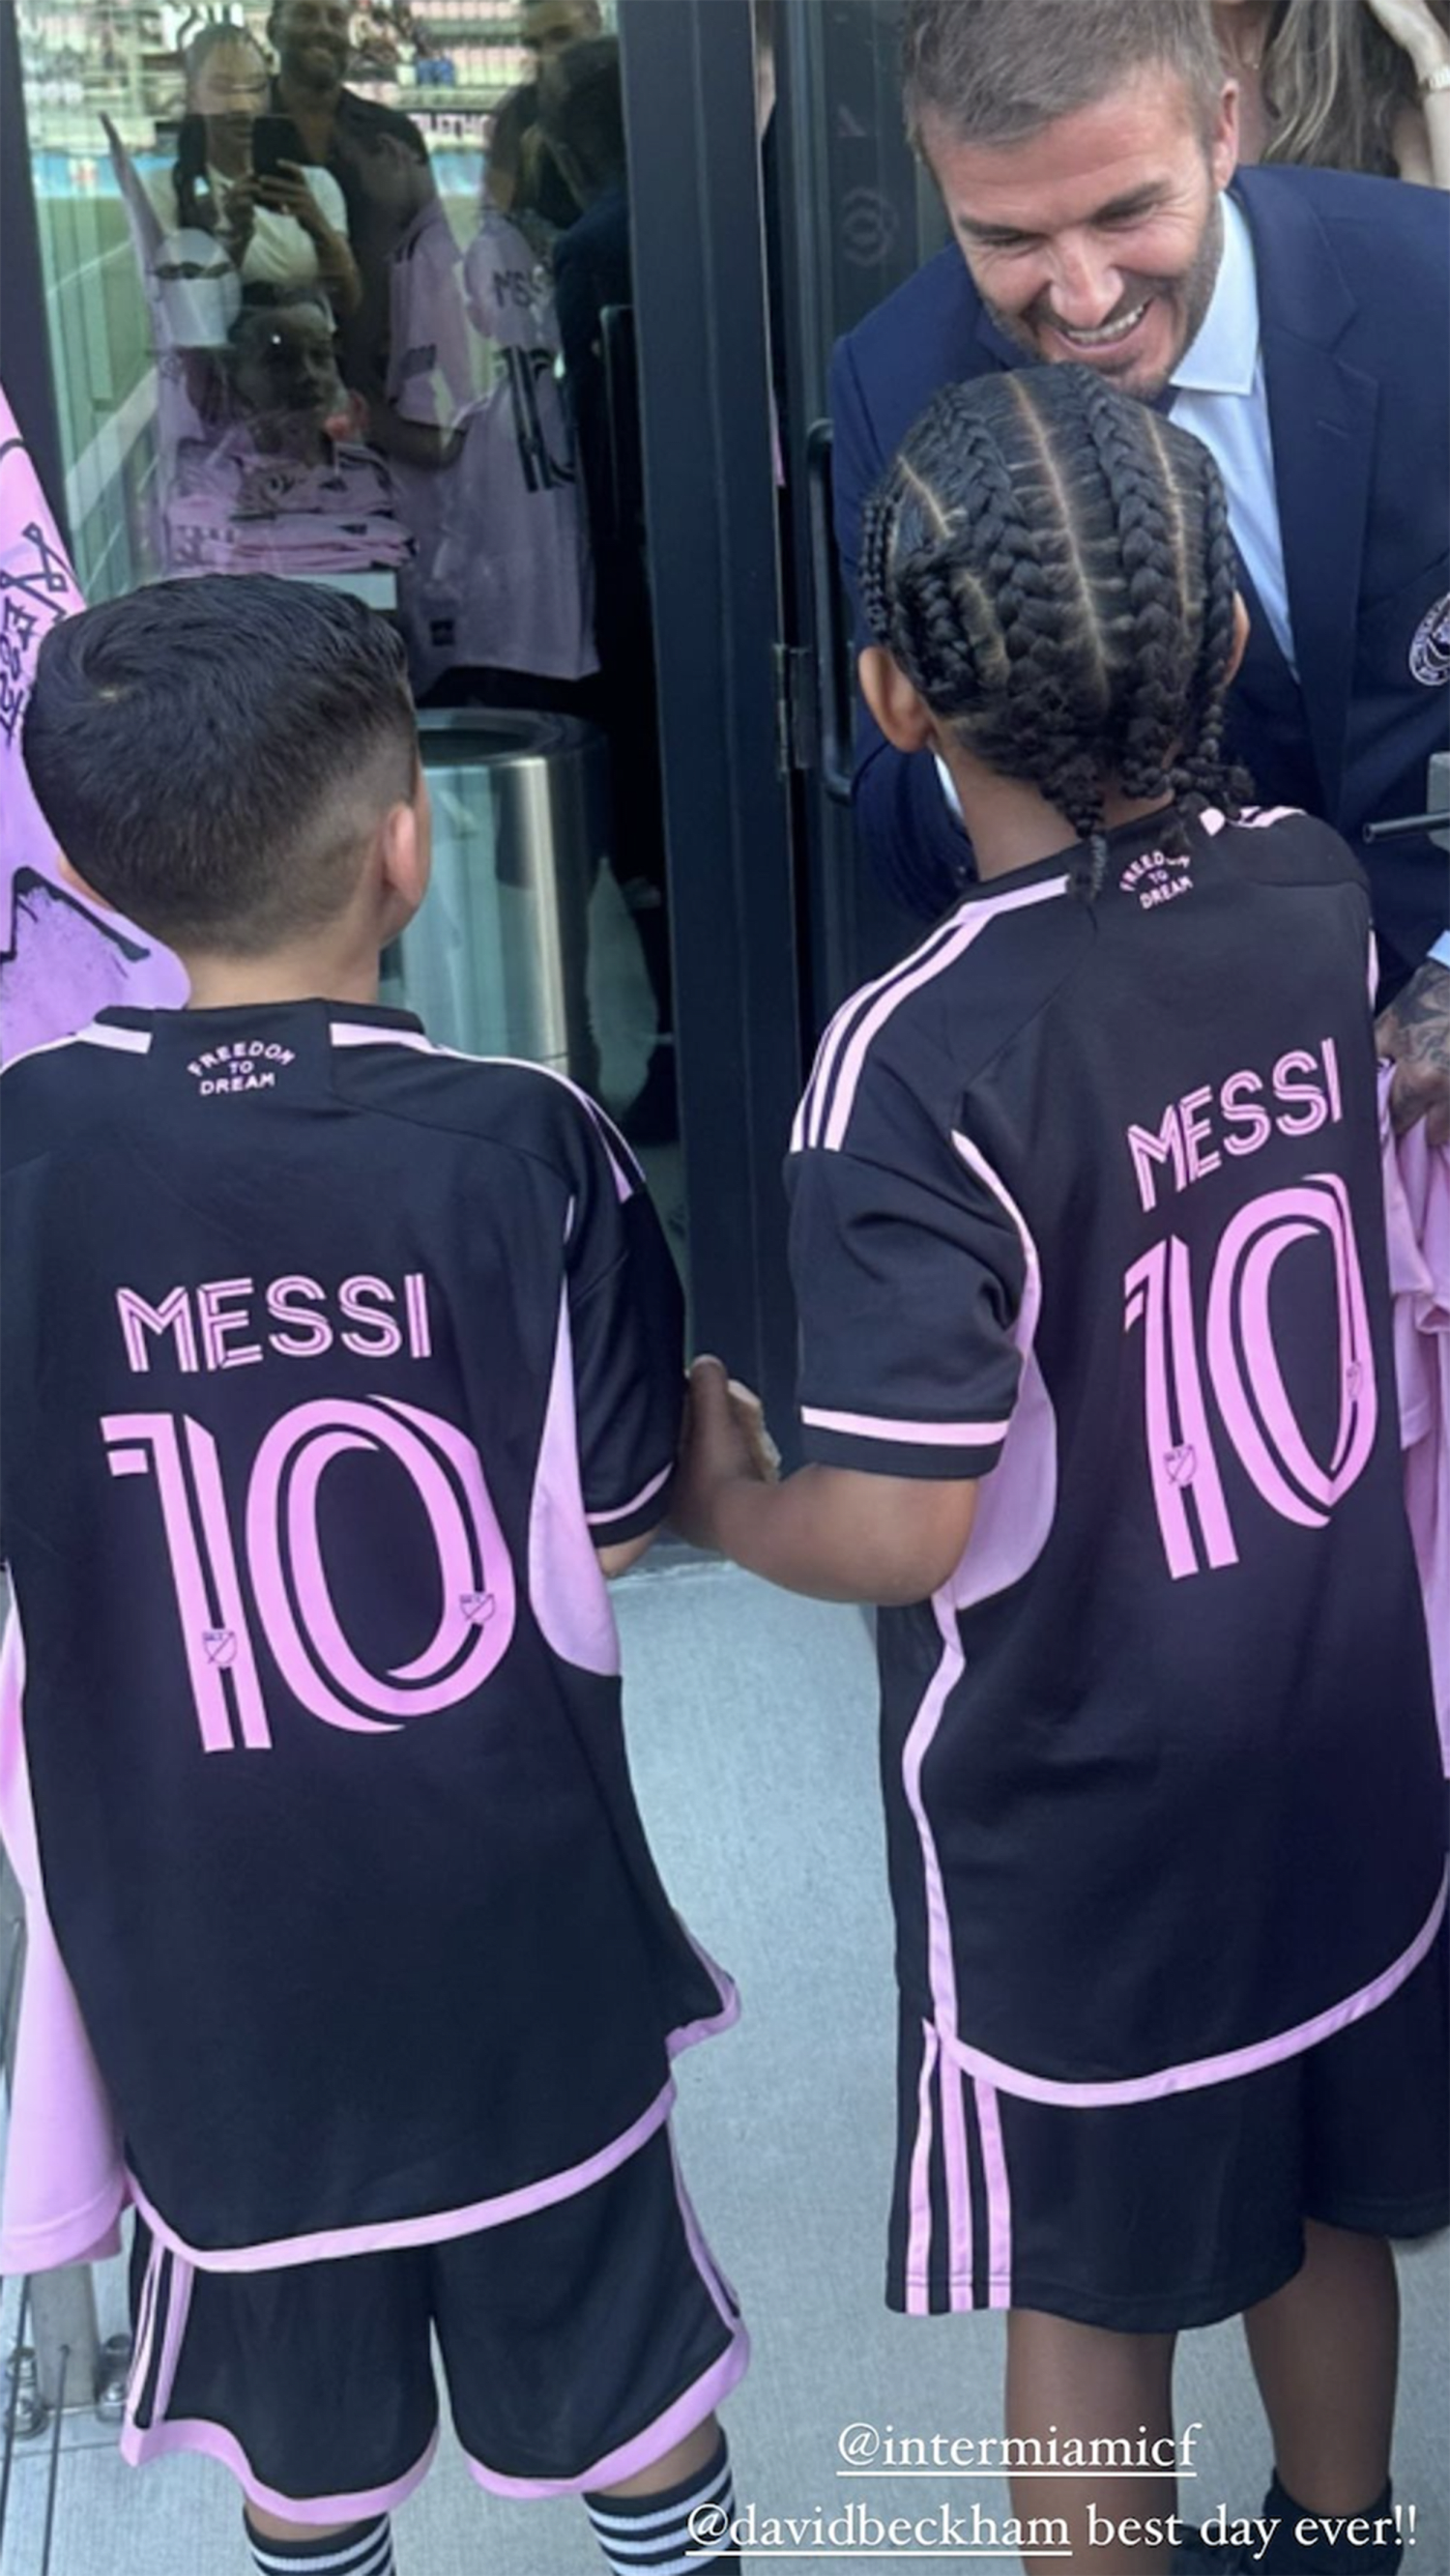 Kim Kardashian's son Saint given Lionel Messi's signed shirt from